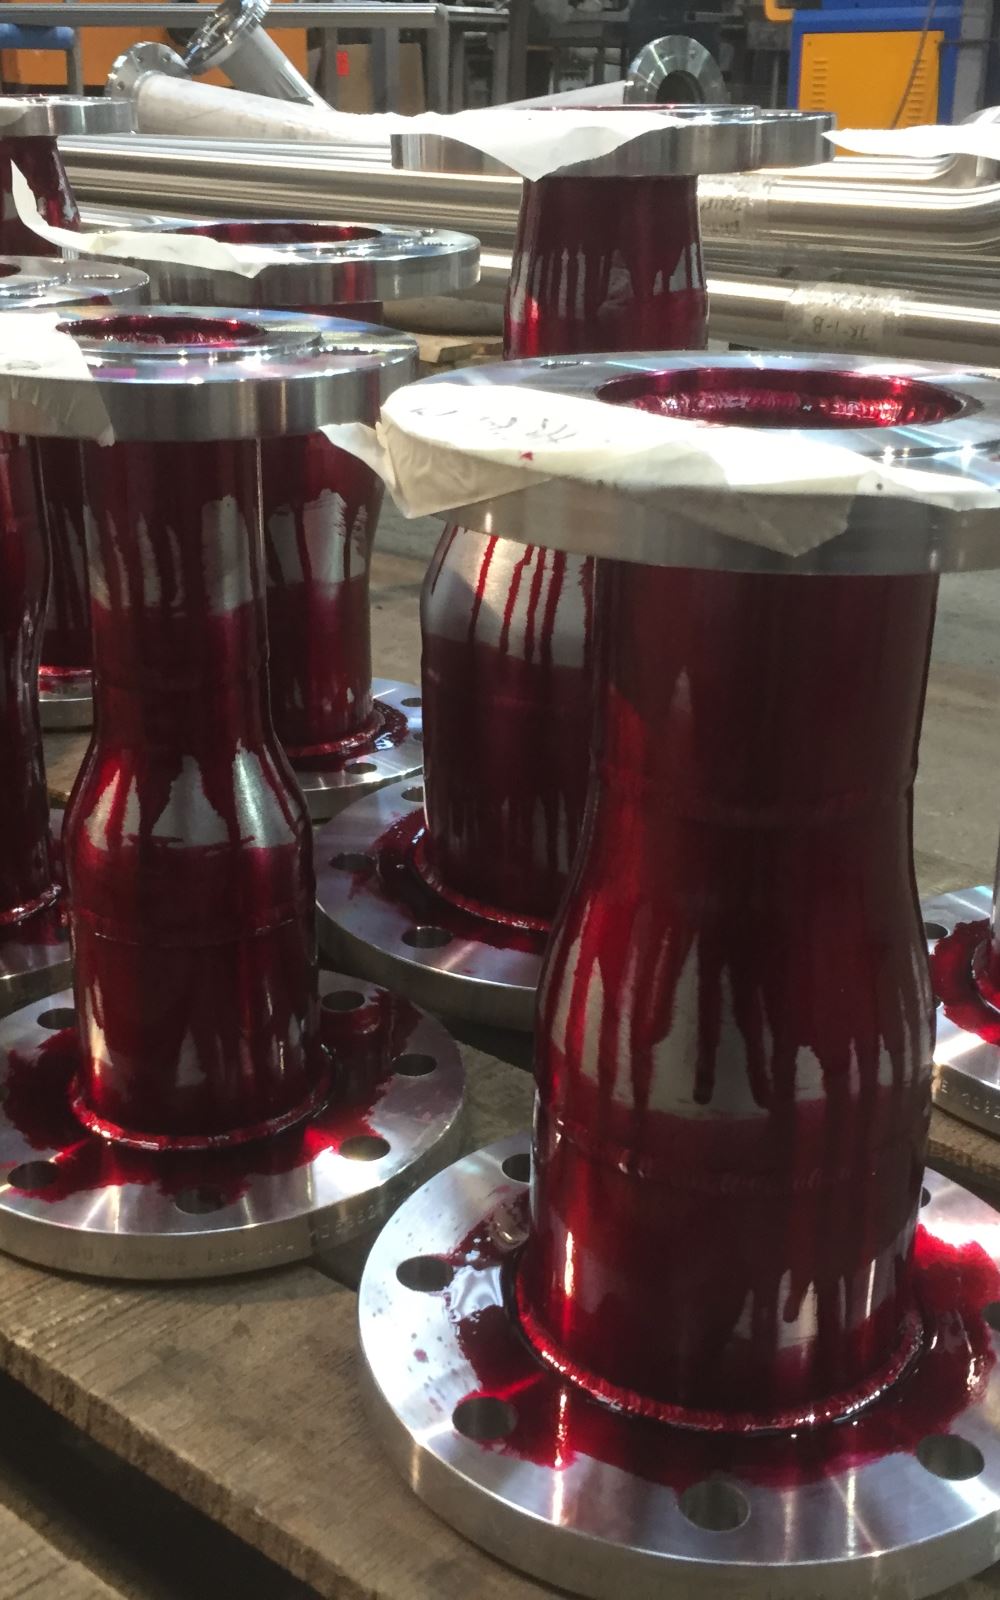 Dye Penetrant Inspection Services in Scotland and the UK